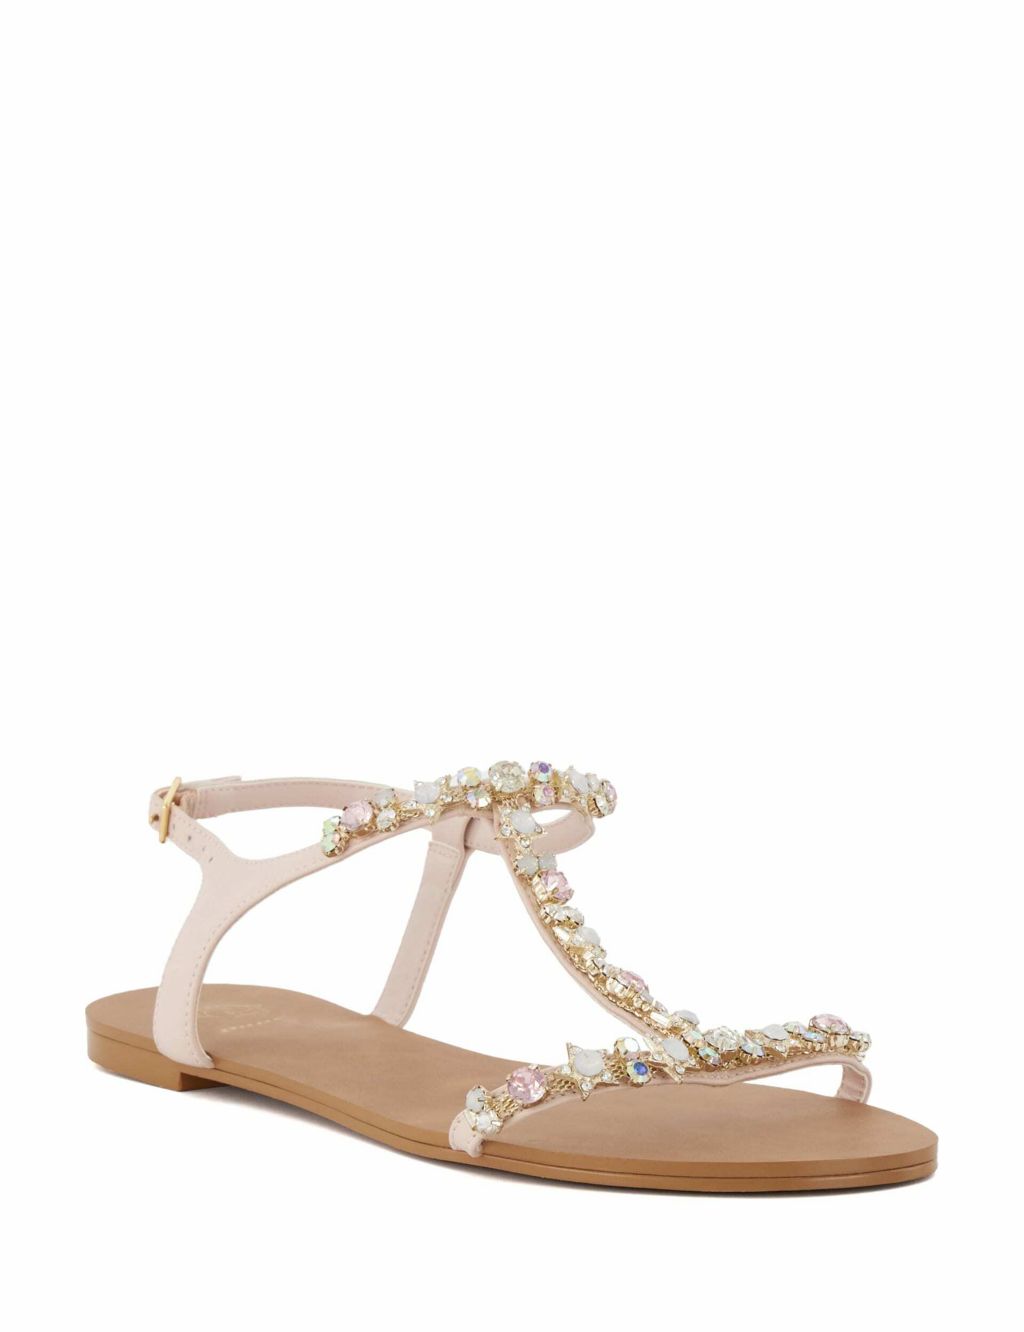 Jewelled Strappy Flat Sandals image 2